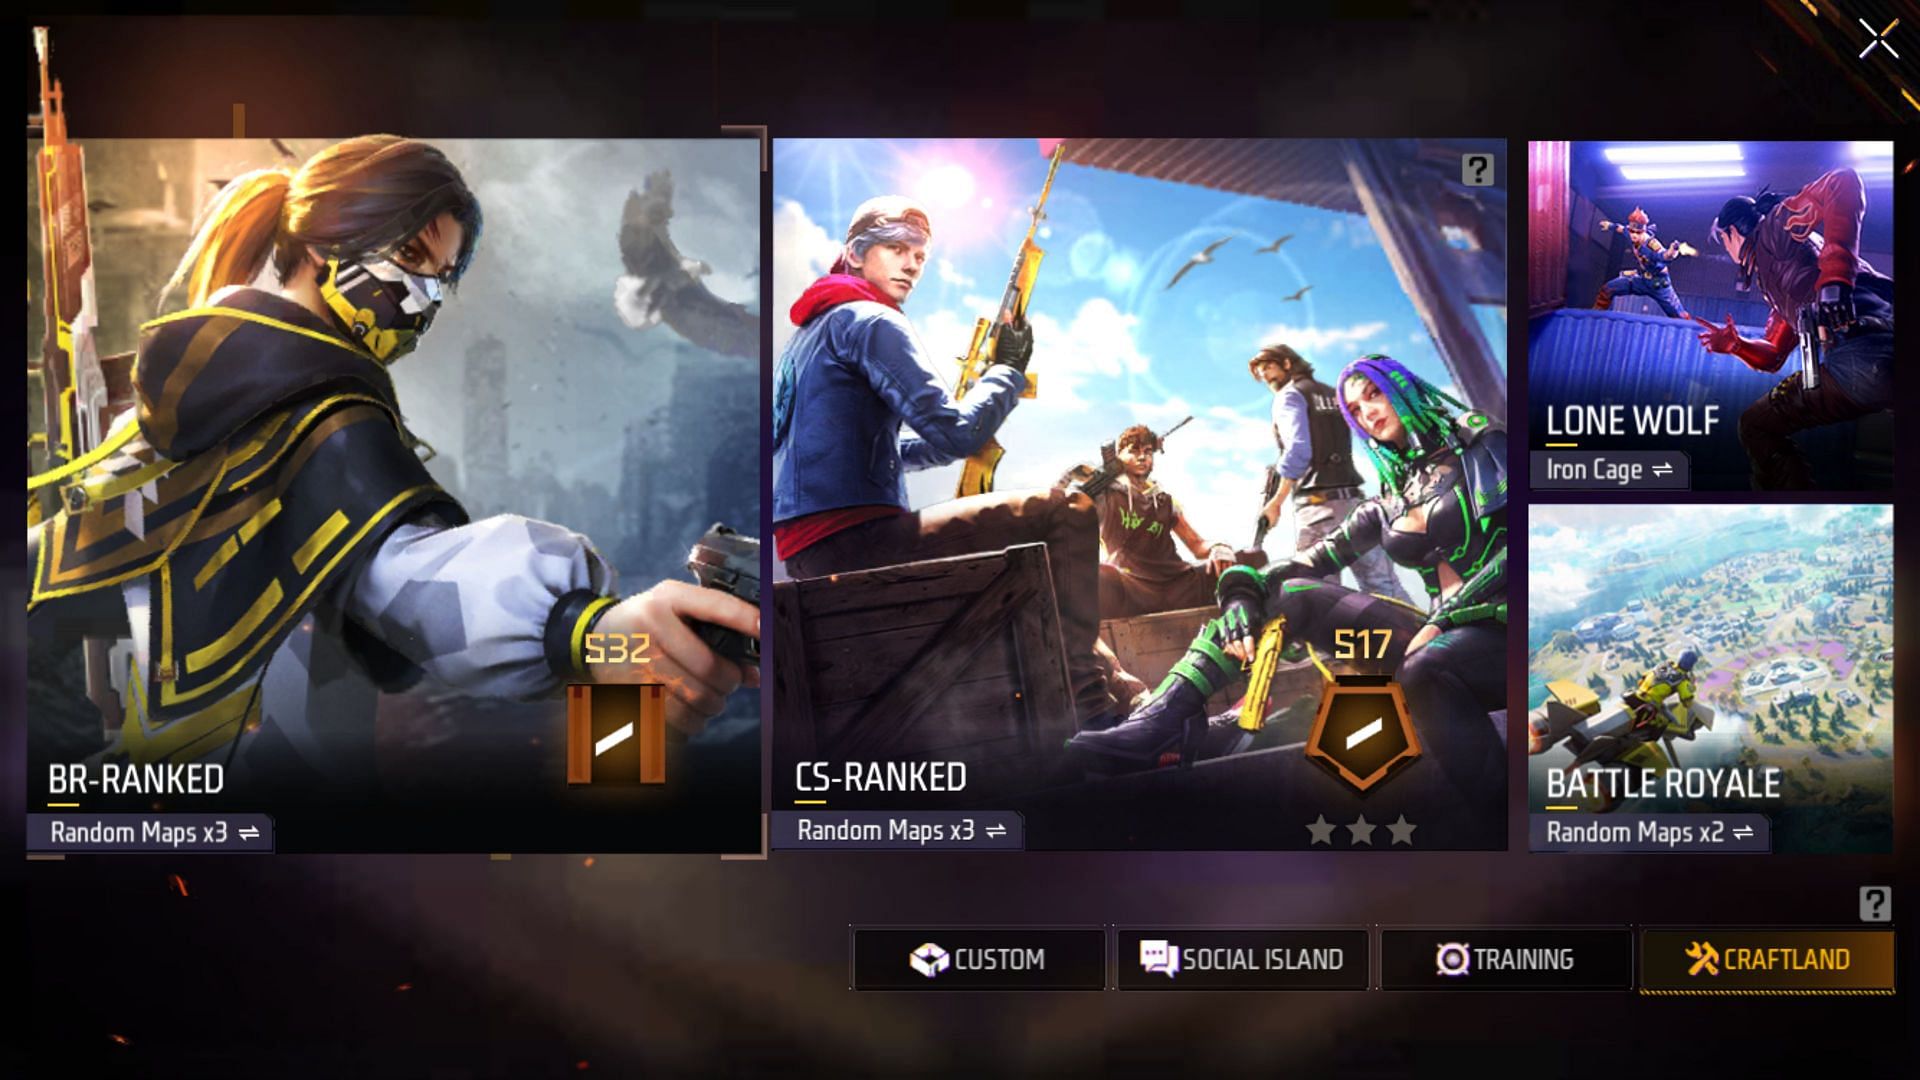 Play BR Ranked matches to earn the tokens (Image via Garena)